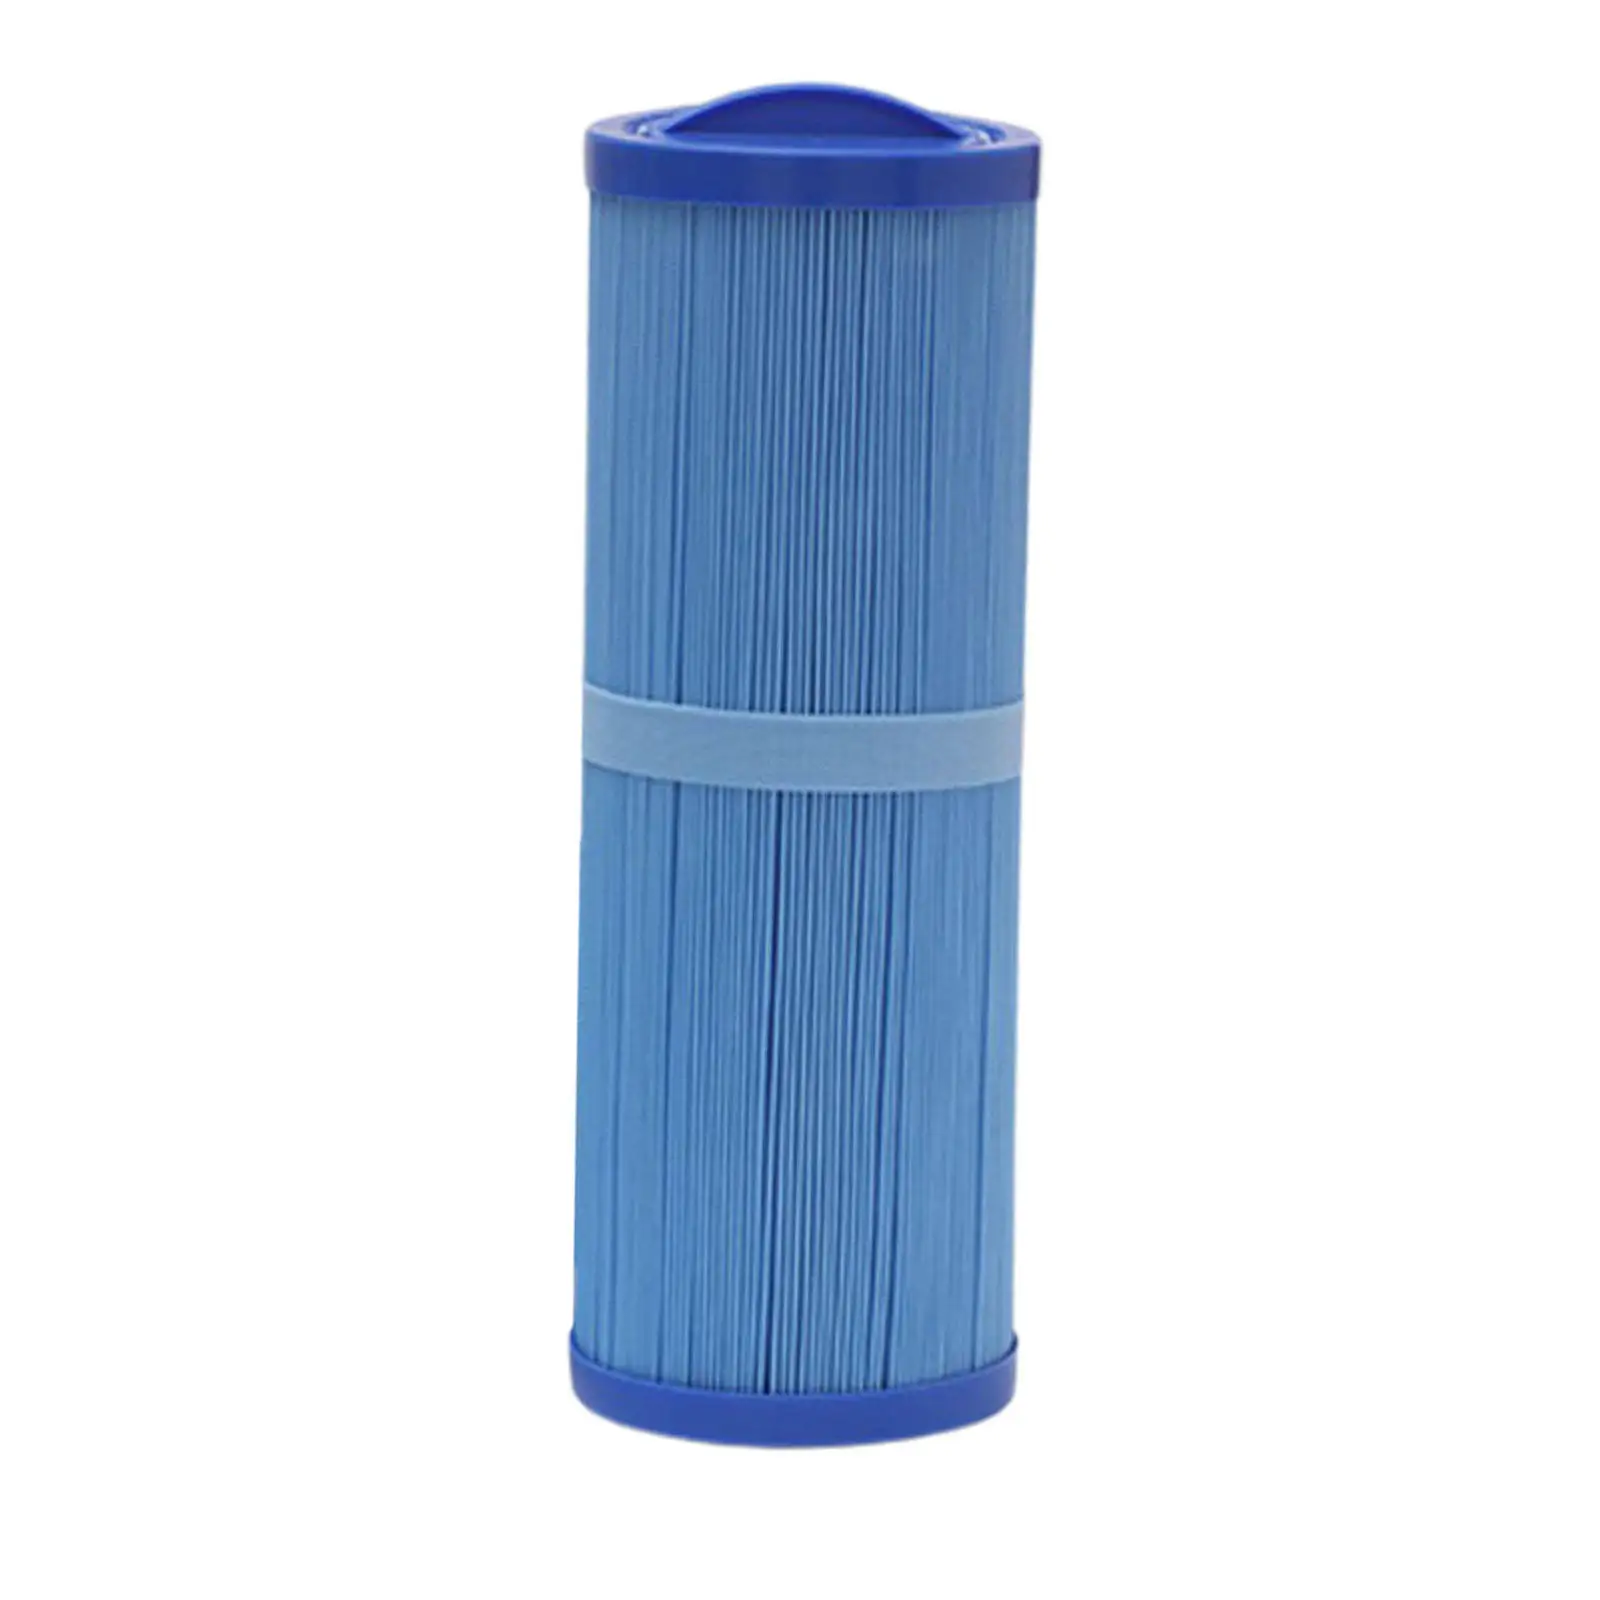 Spa Pool Filter Cartridges Replacement Part for PWW50L-4CH-949